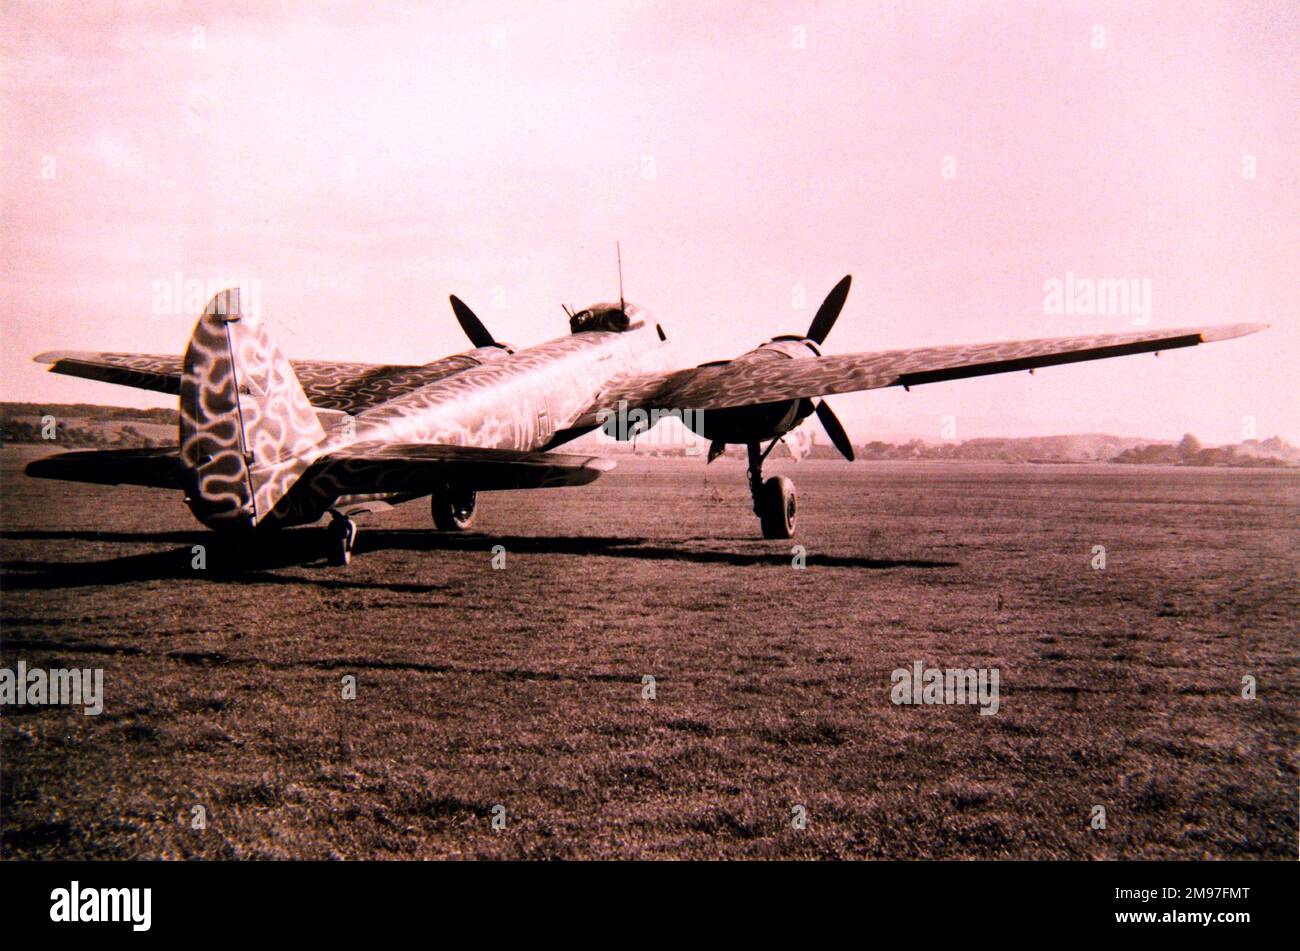 Junkers Ju 88A -Germany's standard light bomber throughout the war Its speed made it difficult to intercept. Stock Photo